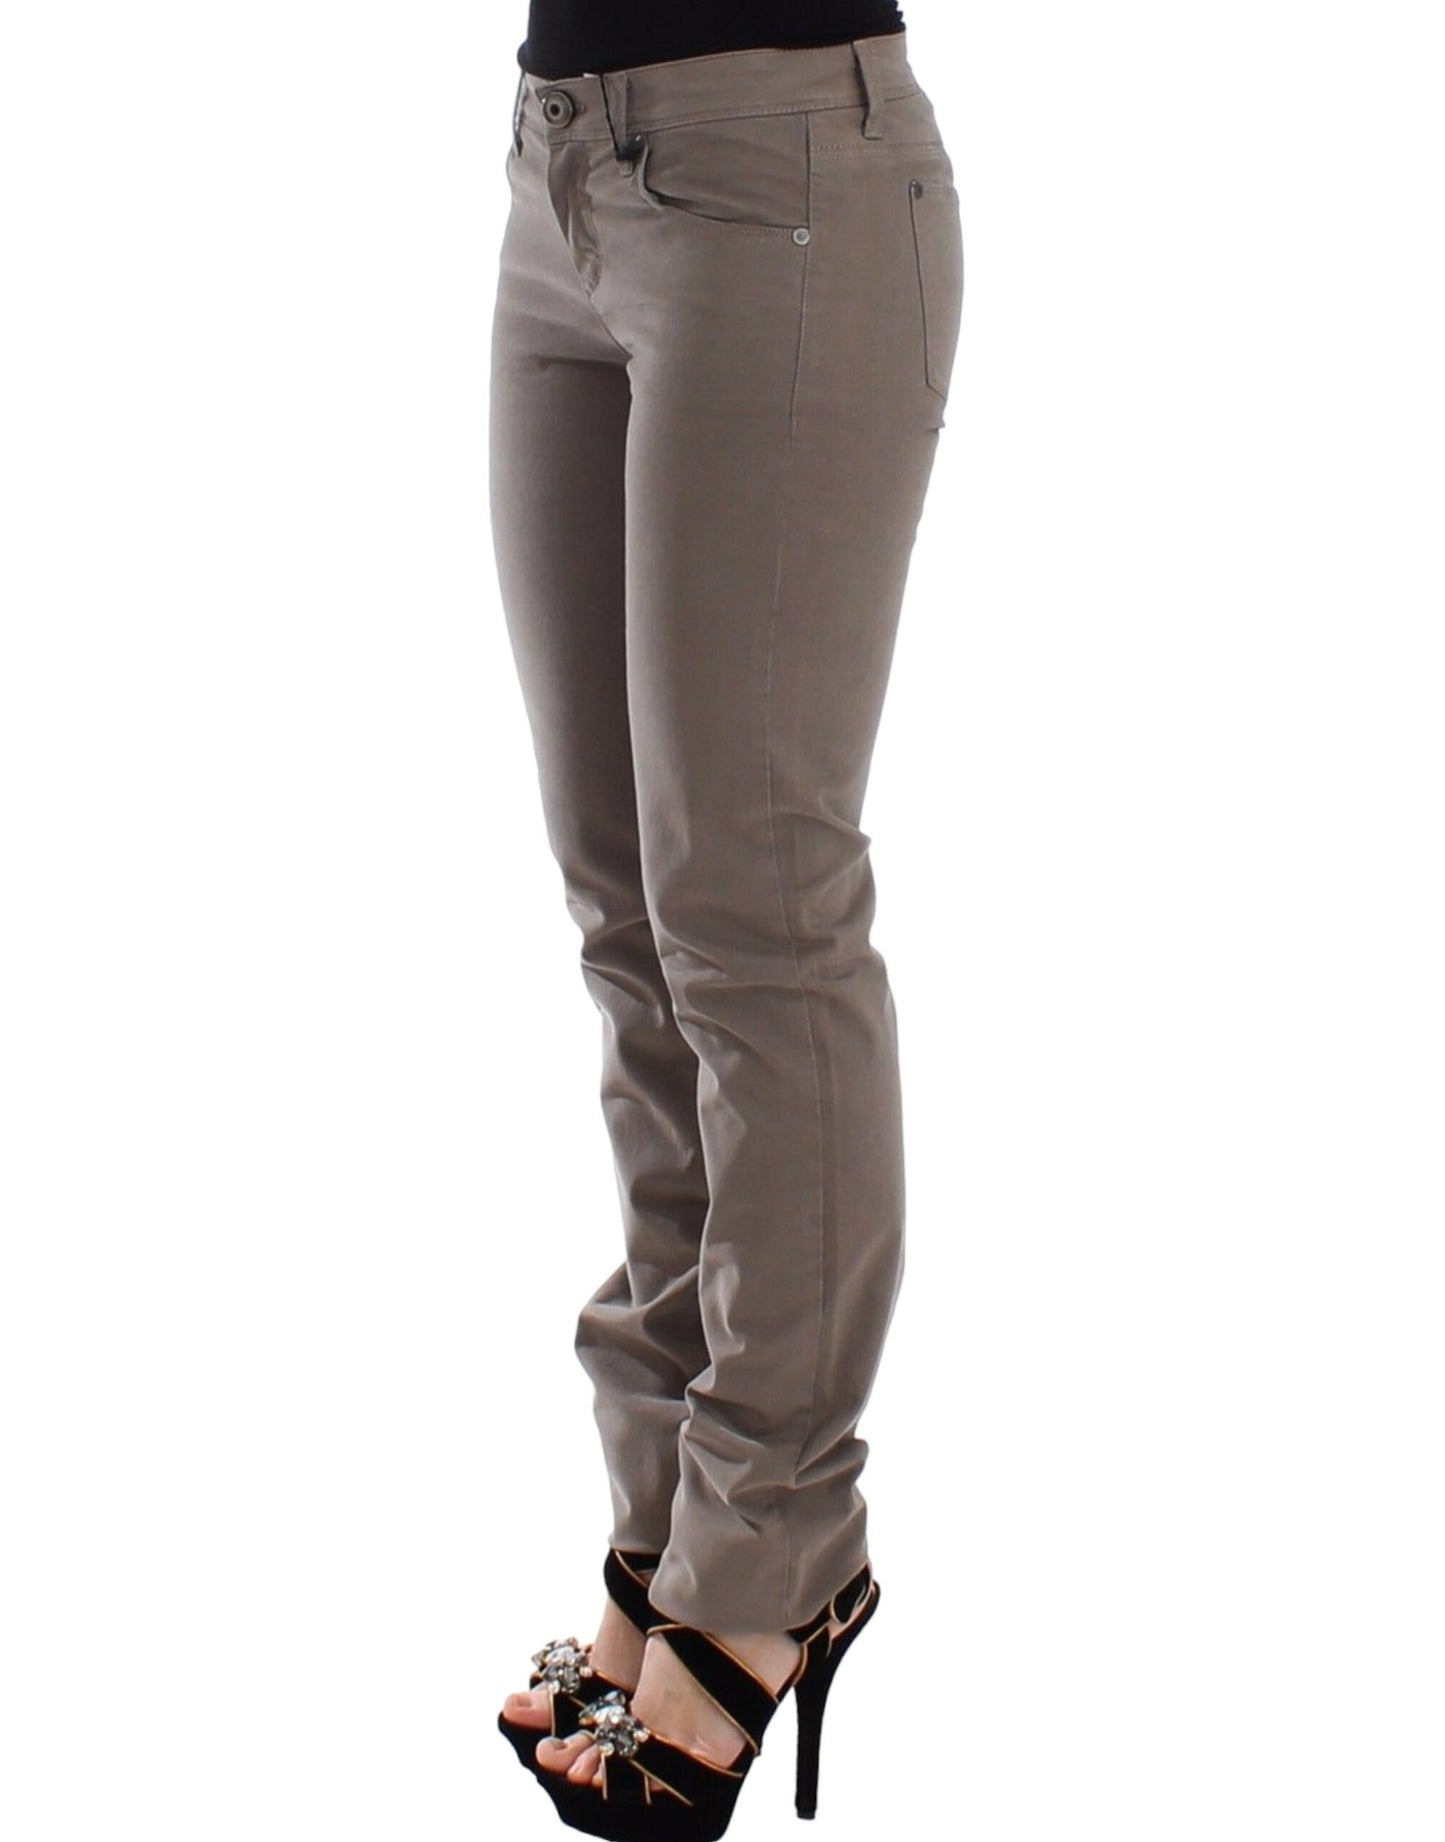 Chic Taupe Skinny Jeans for Elevated Style